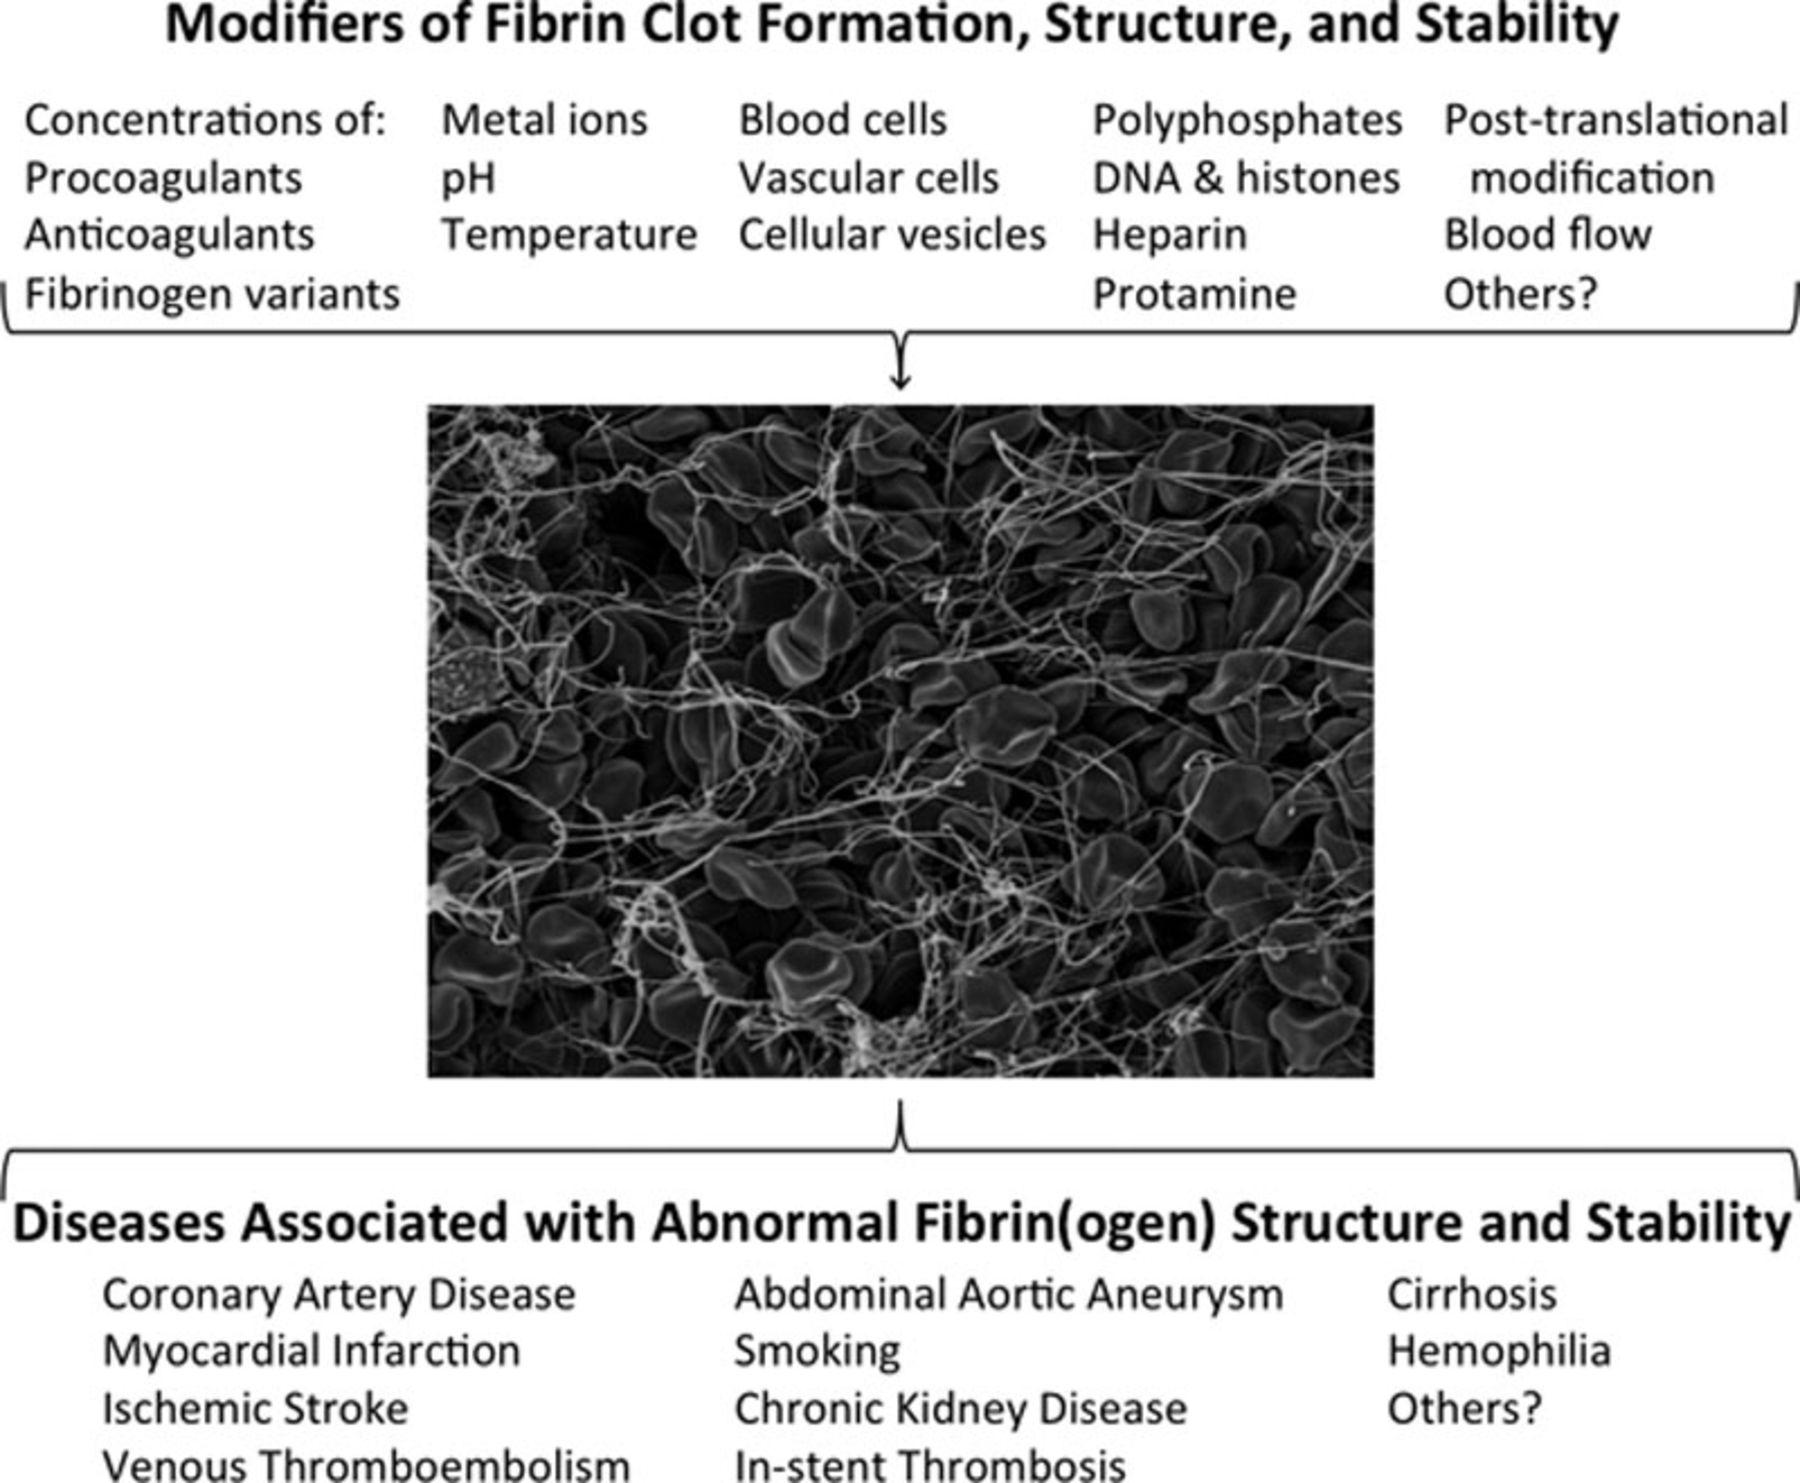 Modifiers of fibrin(ogen) and association with disease. Clot formation, structure, and stability are influenced by conditions present during fibrin generation. Abnormal clot formation is observed in several diseases.